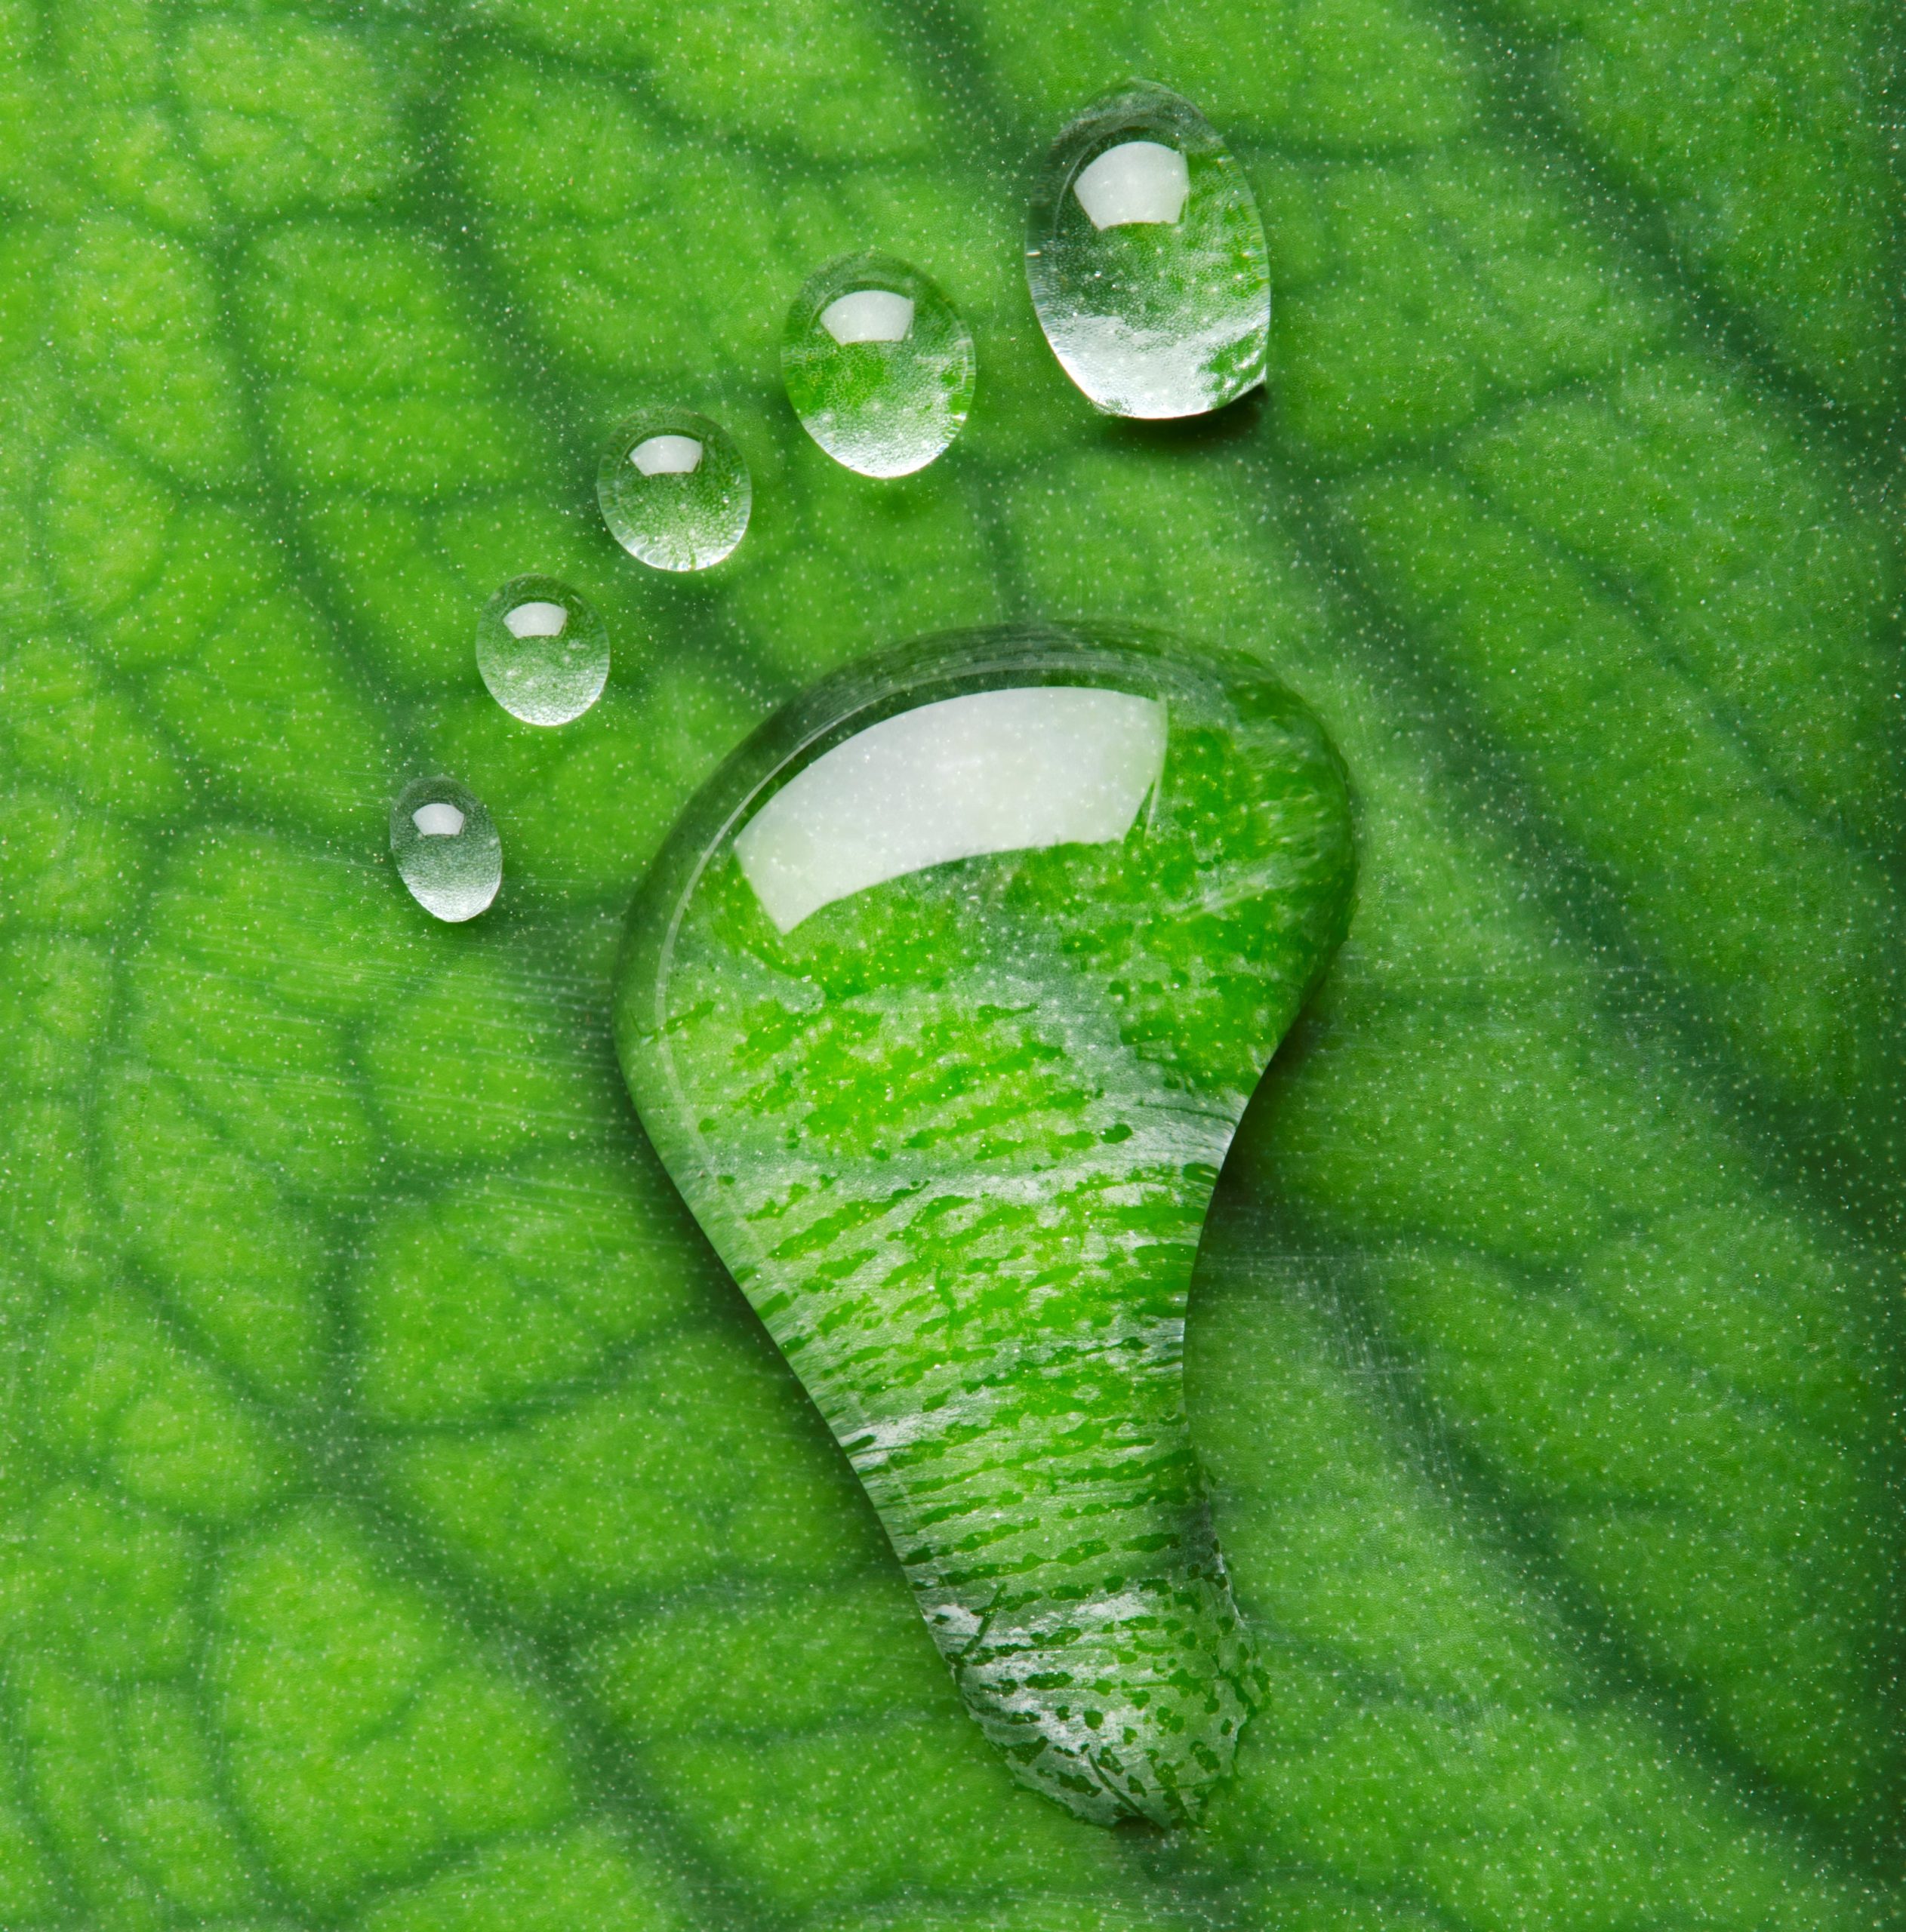 Footprint made from water drops on a green leaf